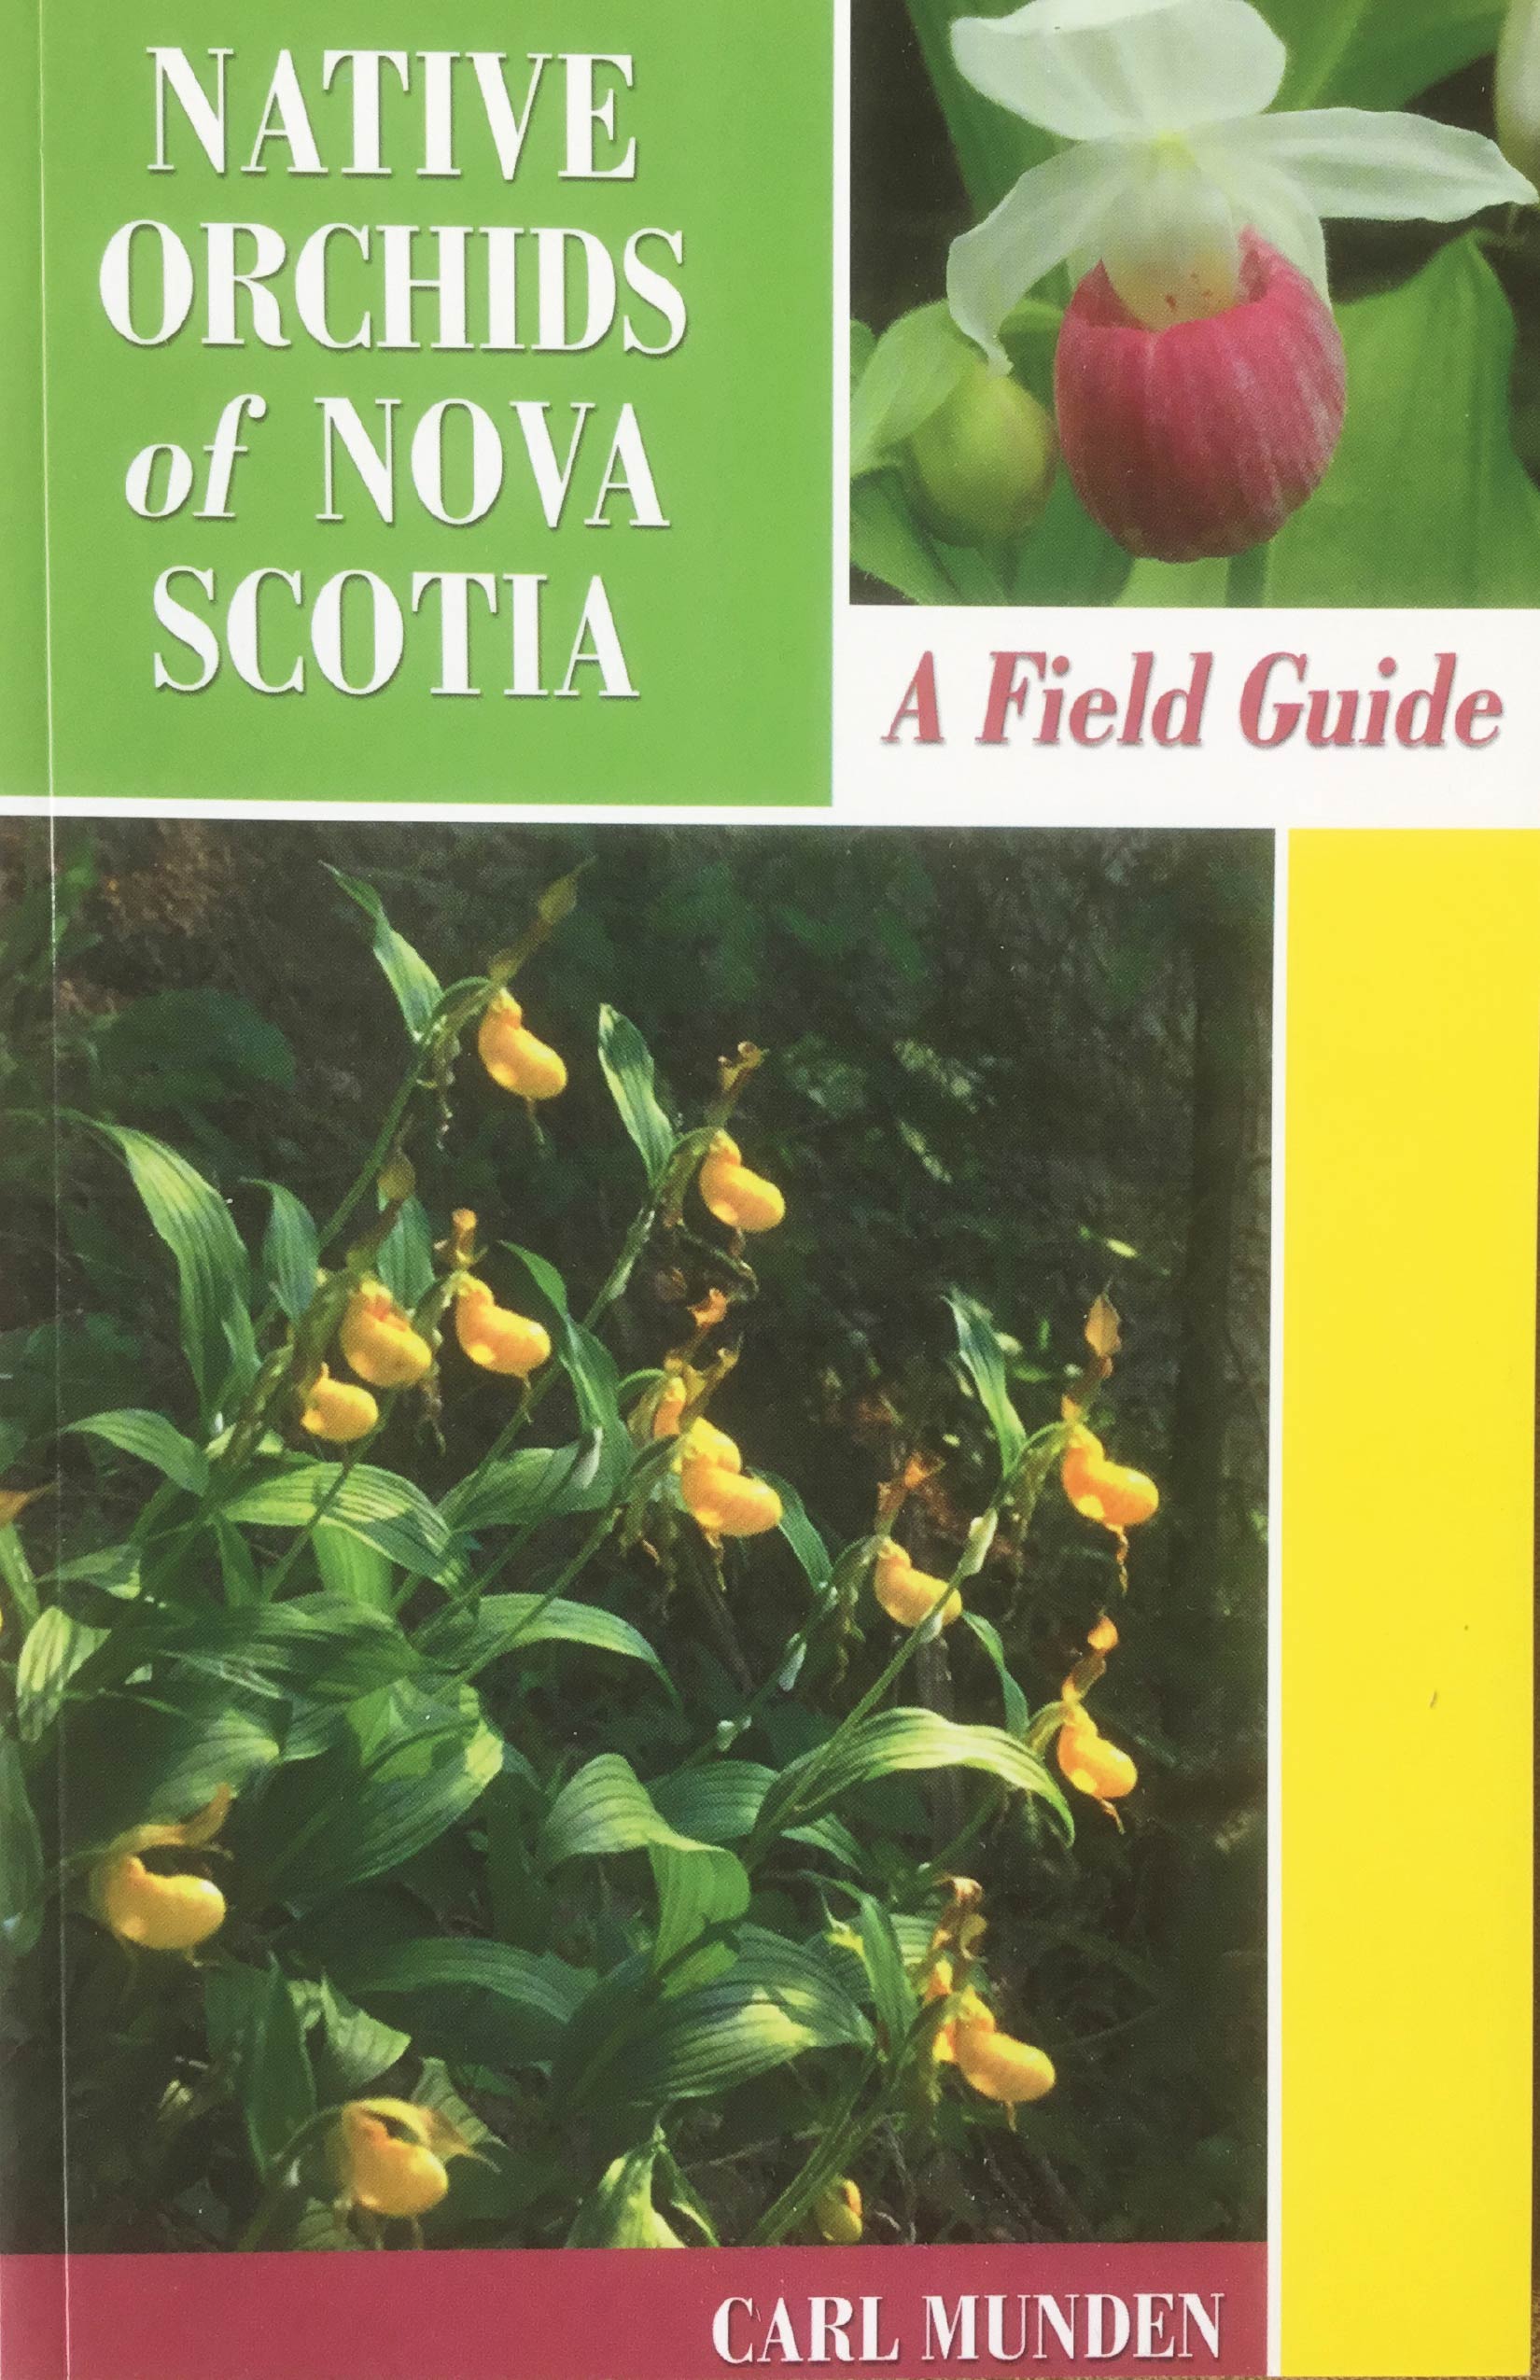 Staff Picks: 3 Guides to Nature’s Bounty